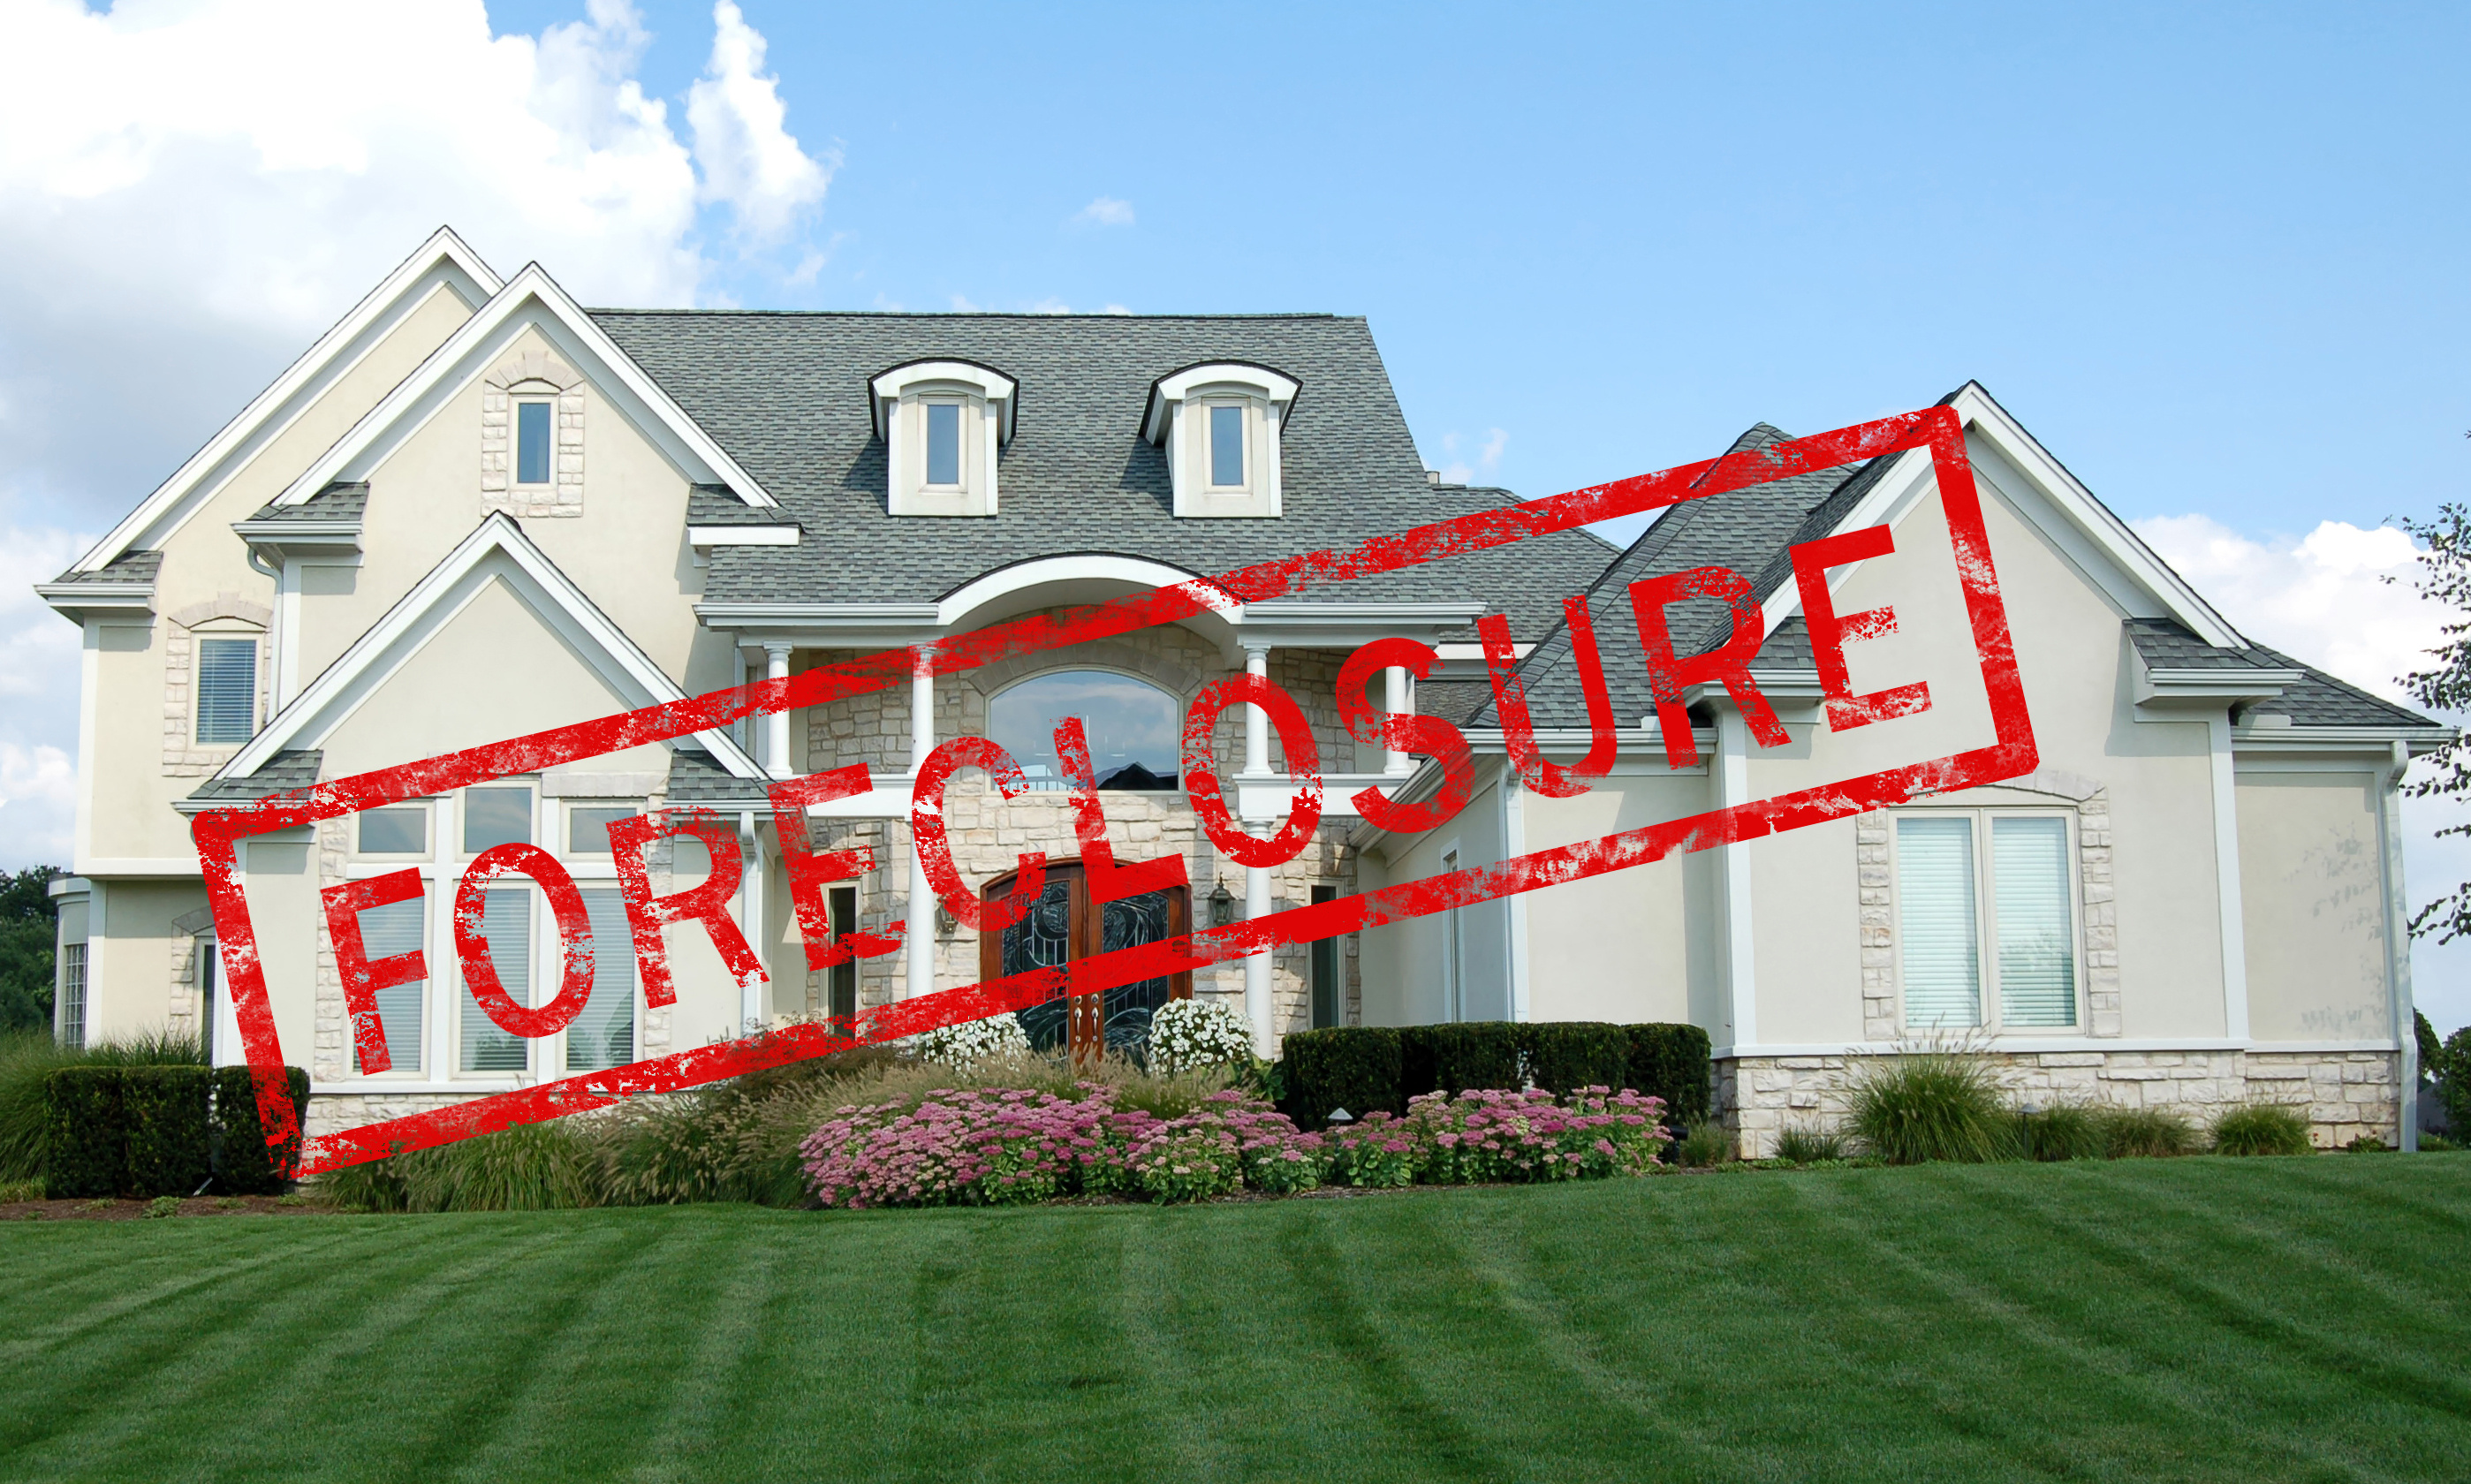 Call SAMRYLEX Real Estate Appraisals and Consulting Services to discuss valuations on Cape May foreclosures